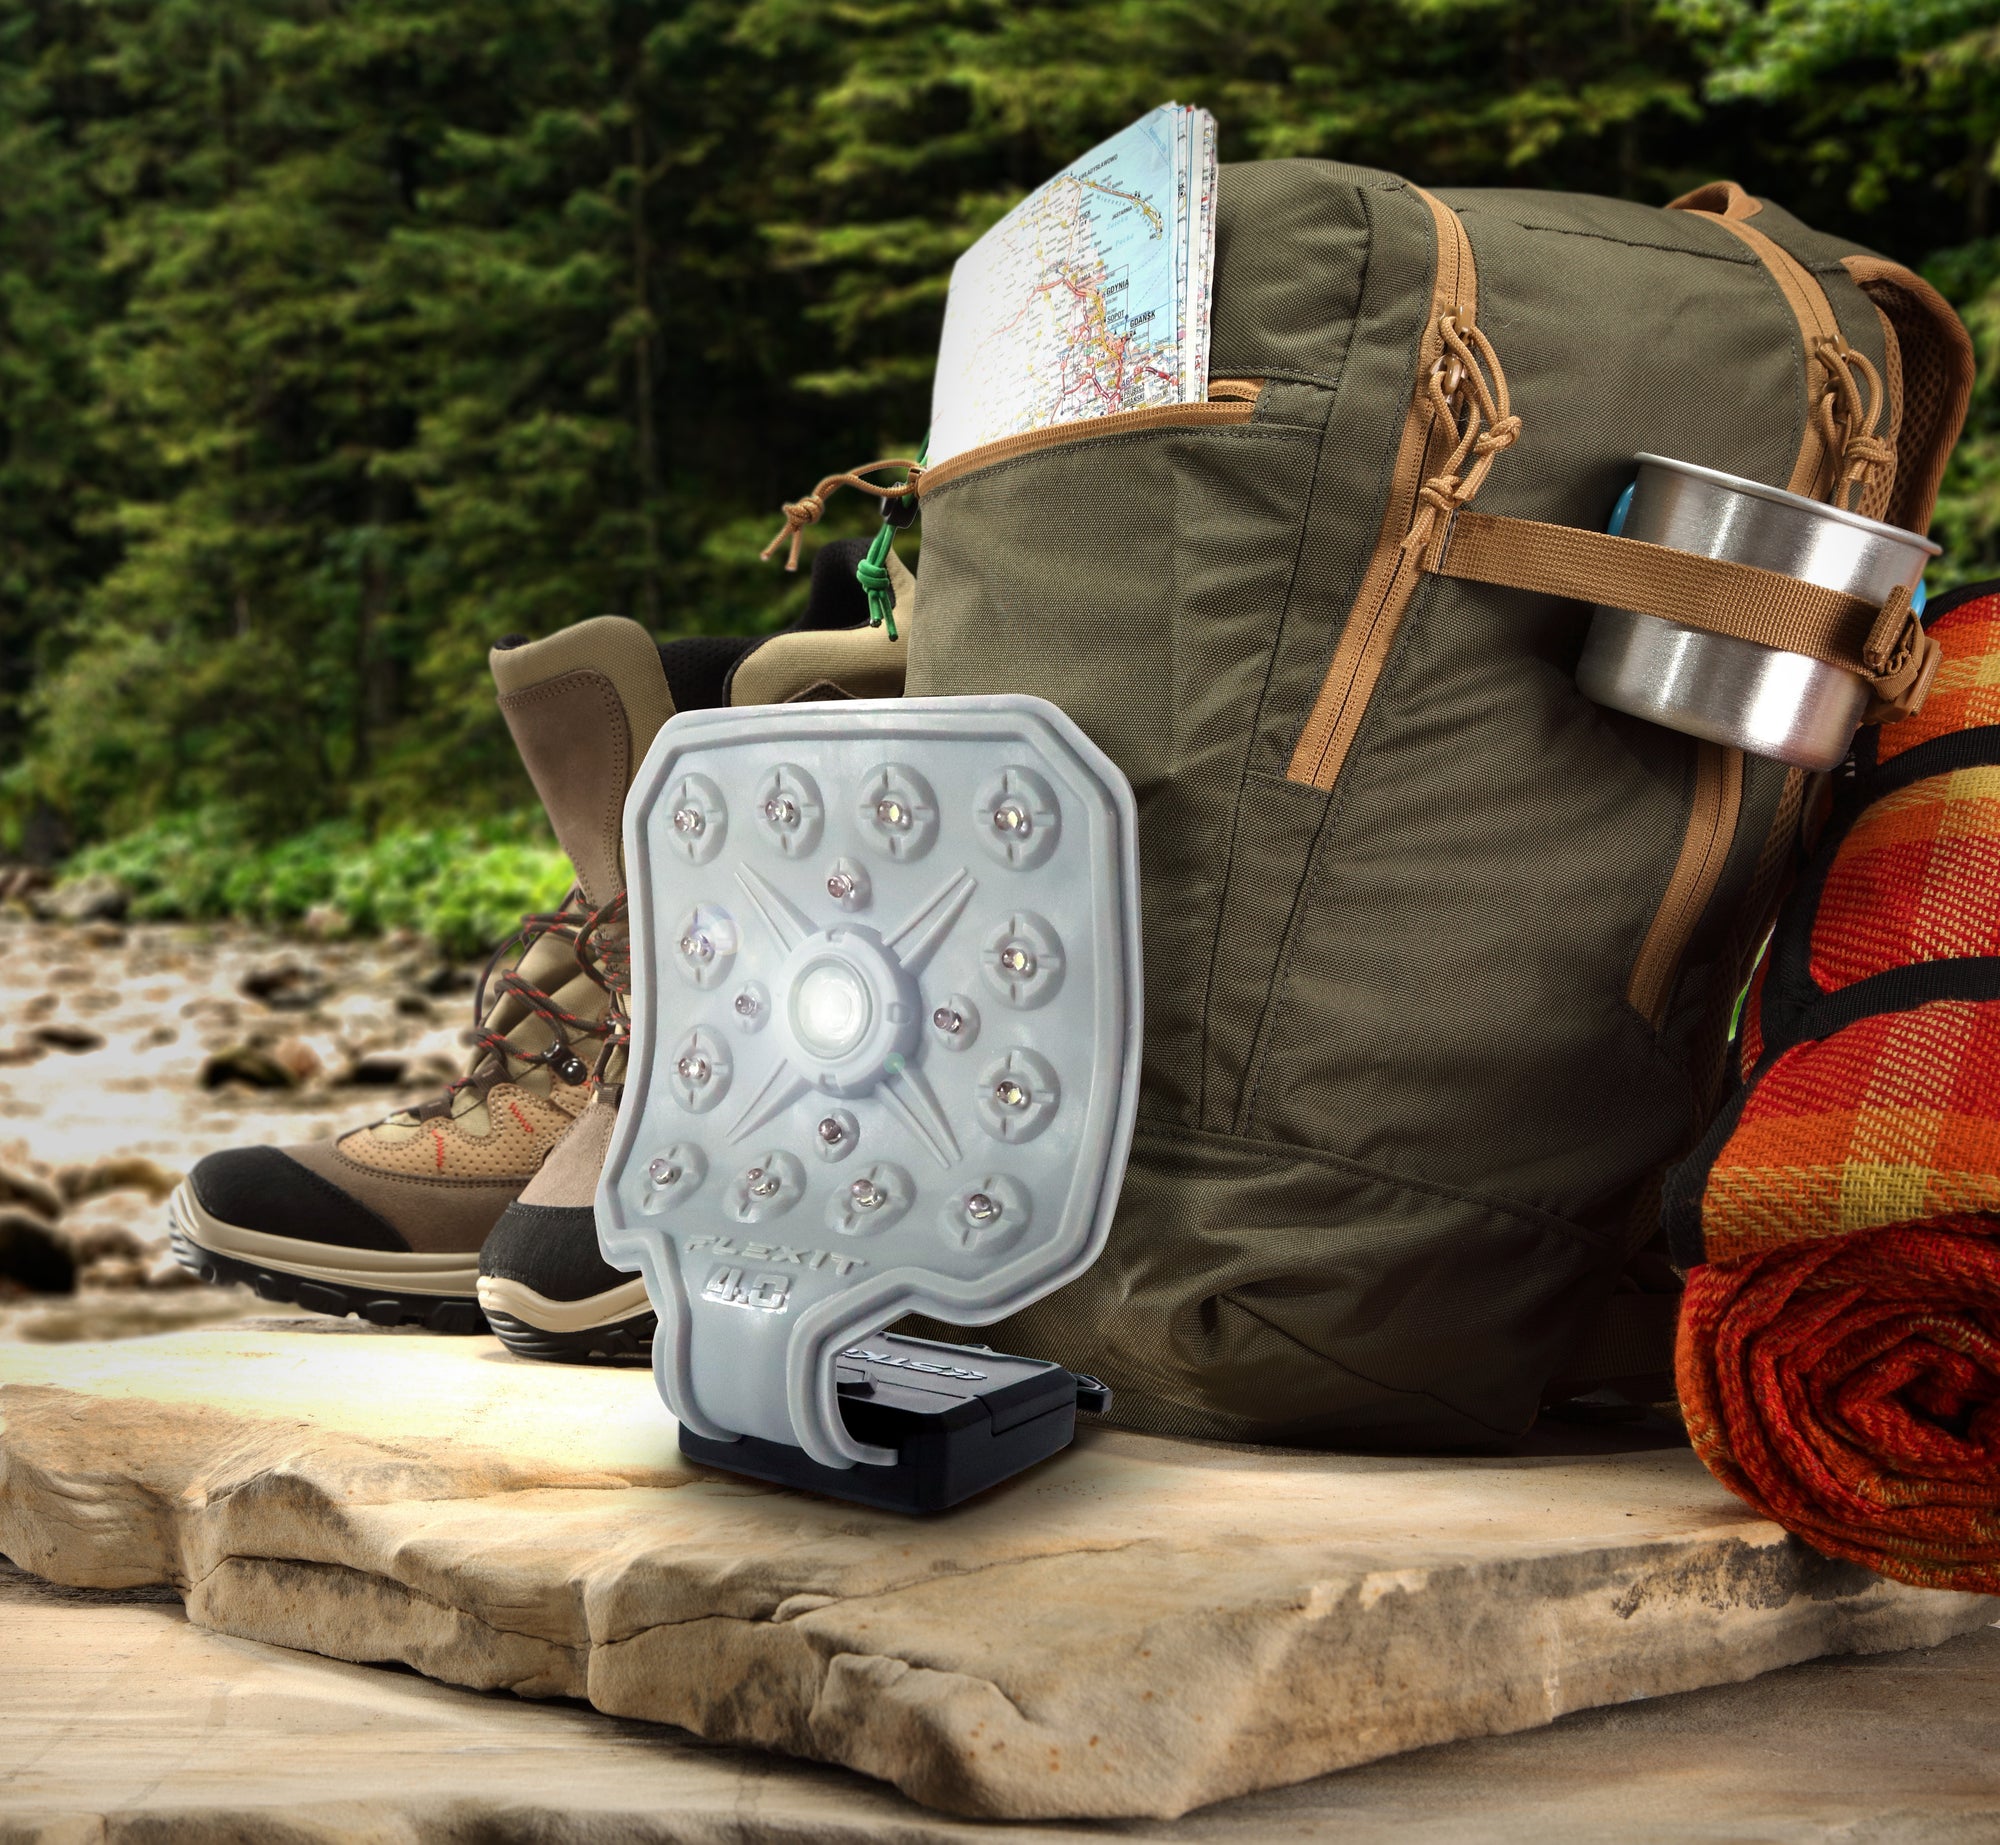 Outdoor image of a hiking backpack spilling out with the essentials like a map, water cup, flashlight, and waterproof boots. All sitting on a rock near a river with a forest full of fur trees in the background.